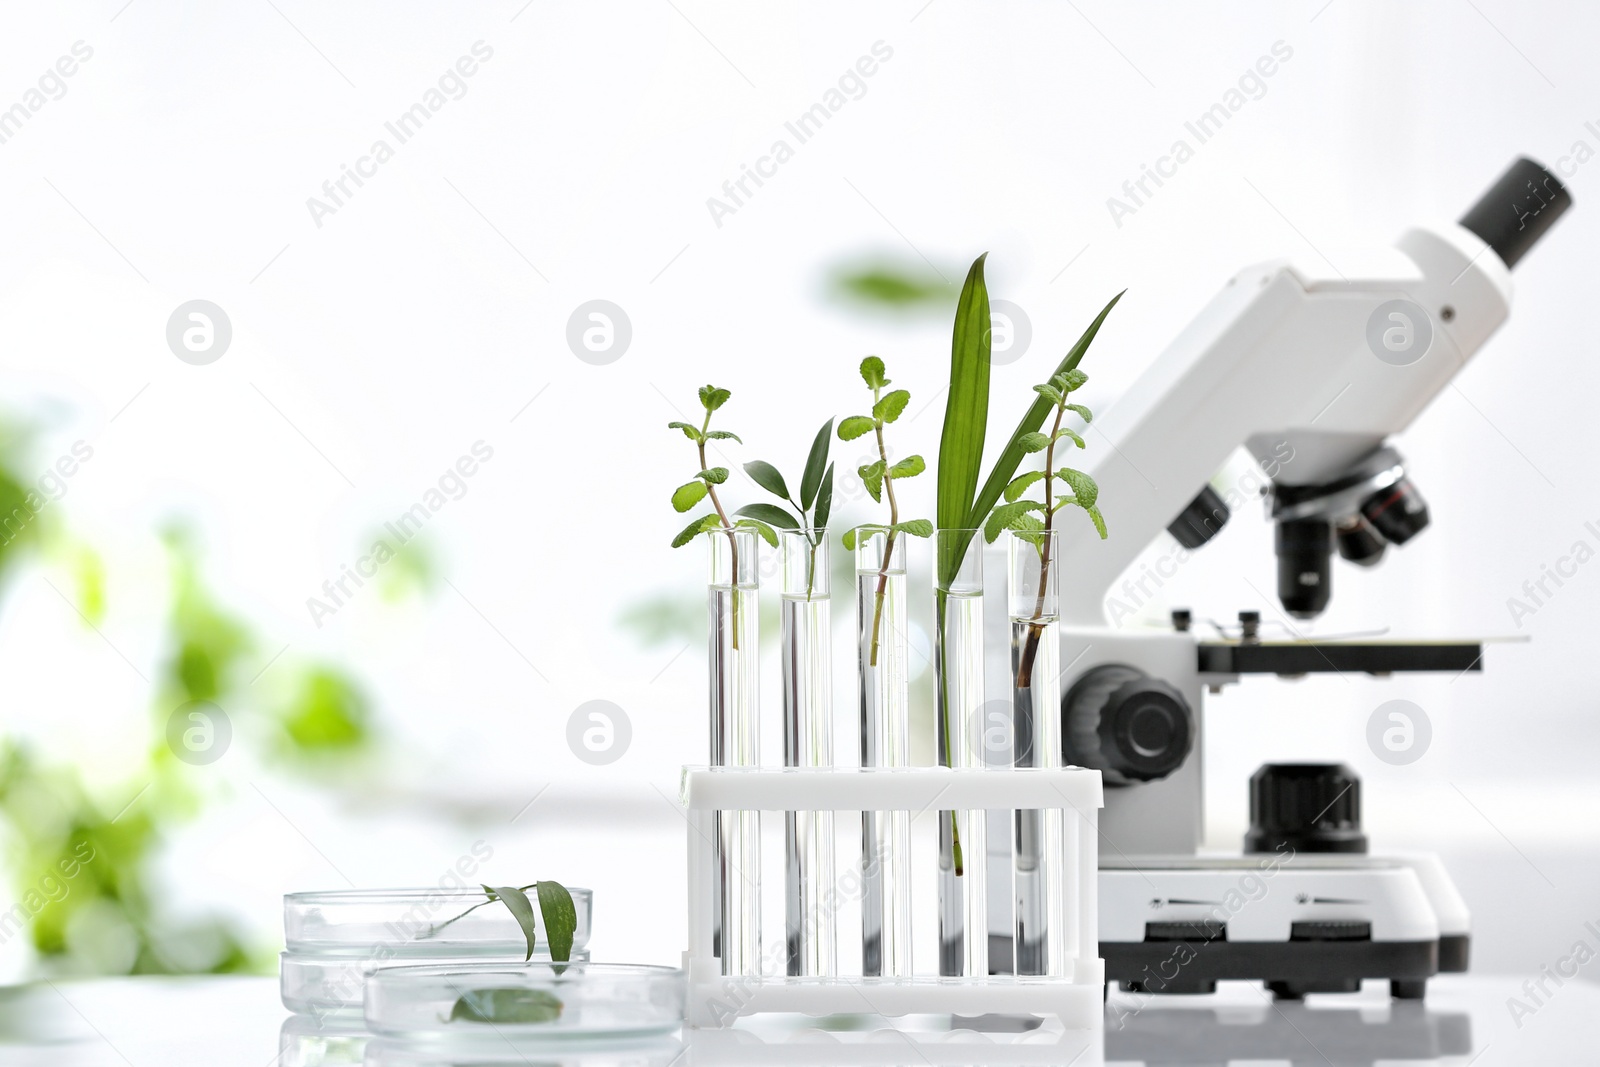 Photo of Laboratory glassware with different plants and microscope on table against blurred background, space for text. Chemistry research